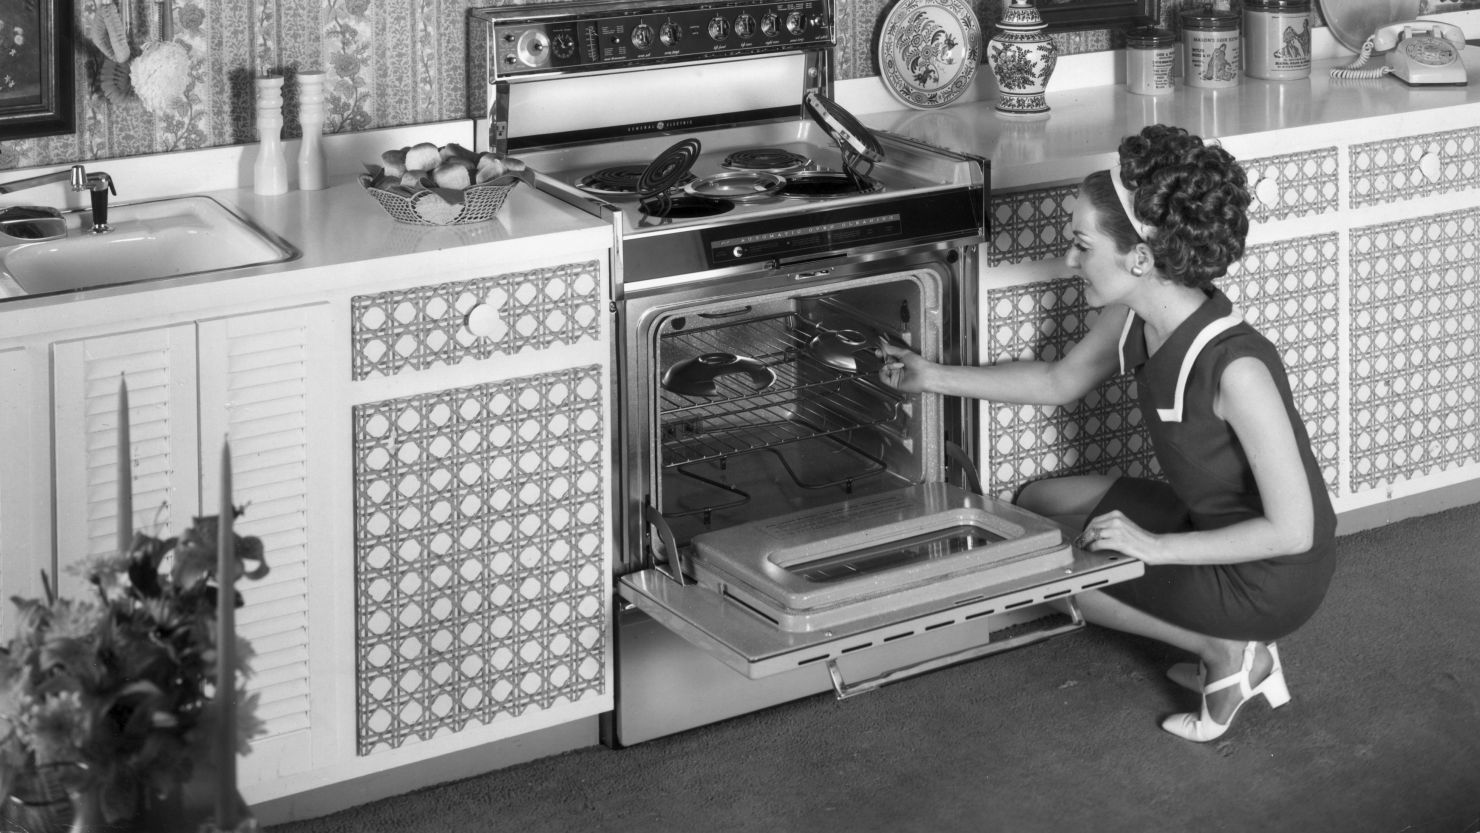 The Kitchen Archive (Getty Research Institute)